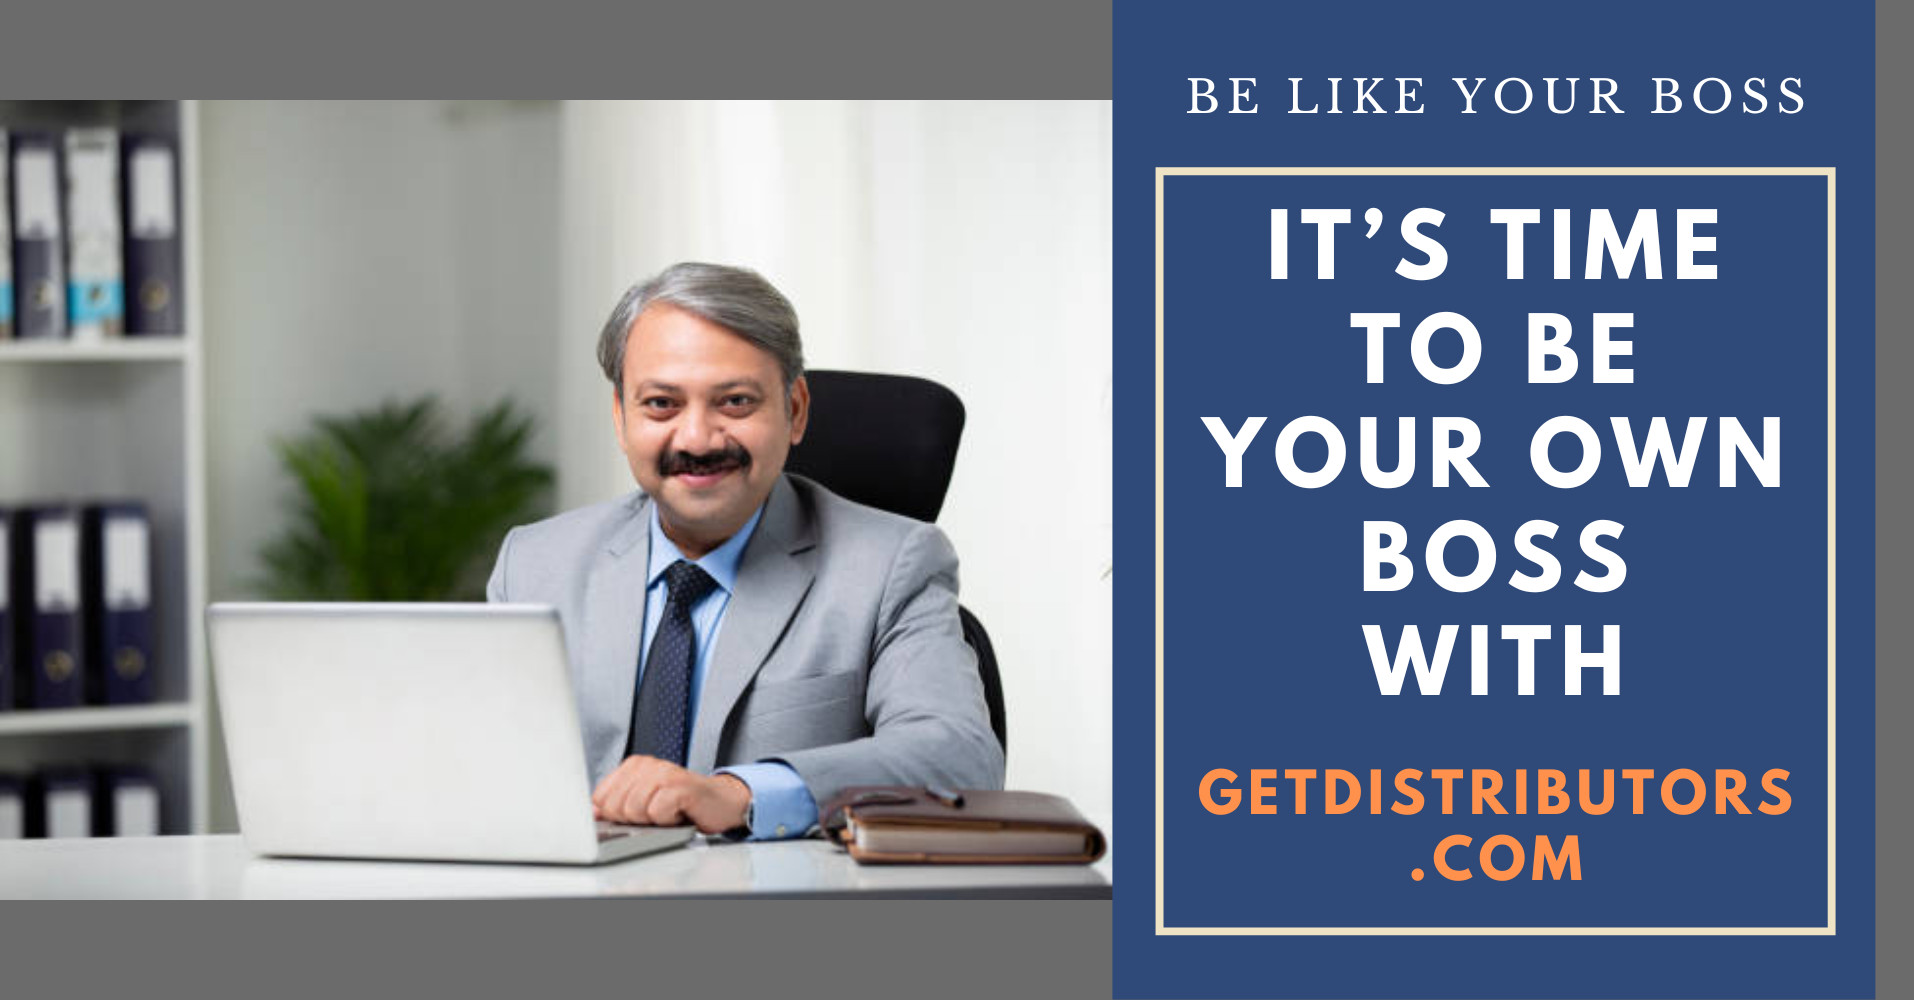 It’s time to be your own boss with GetDistributors.com